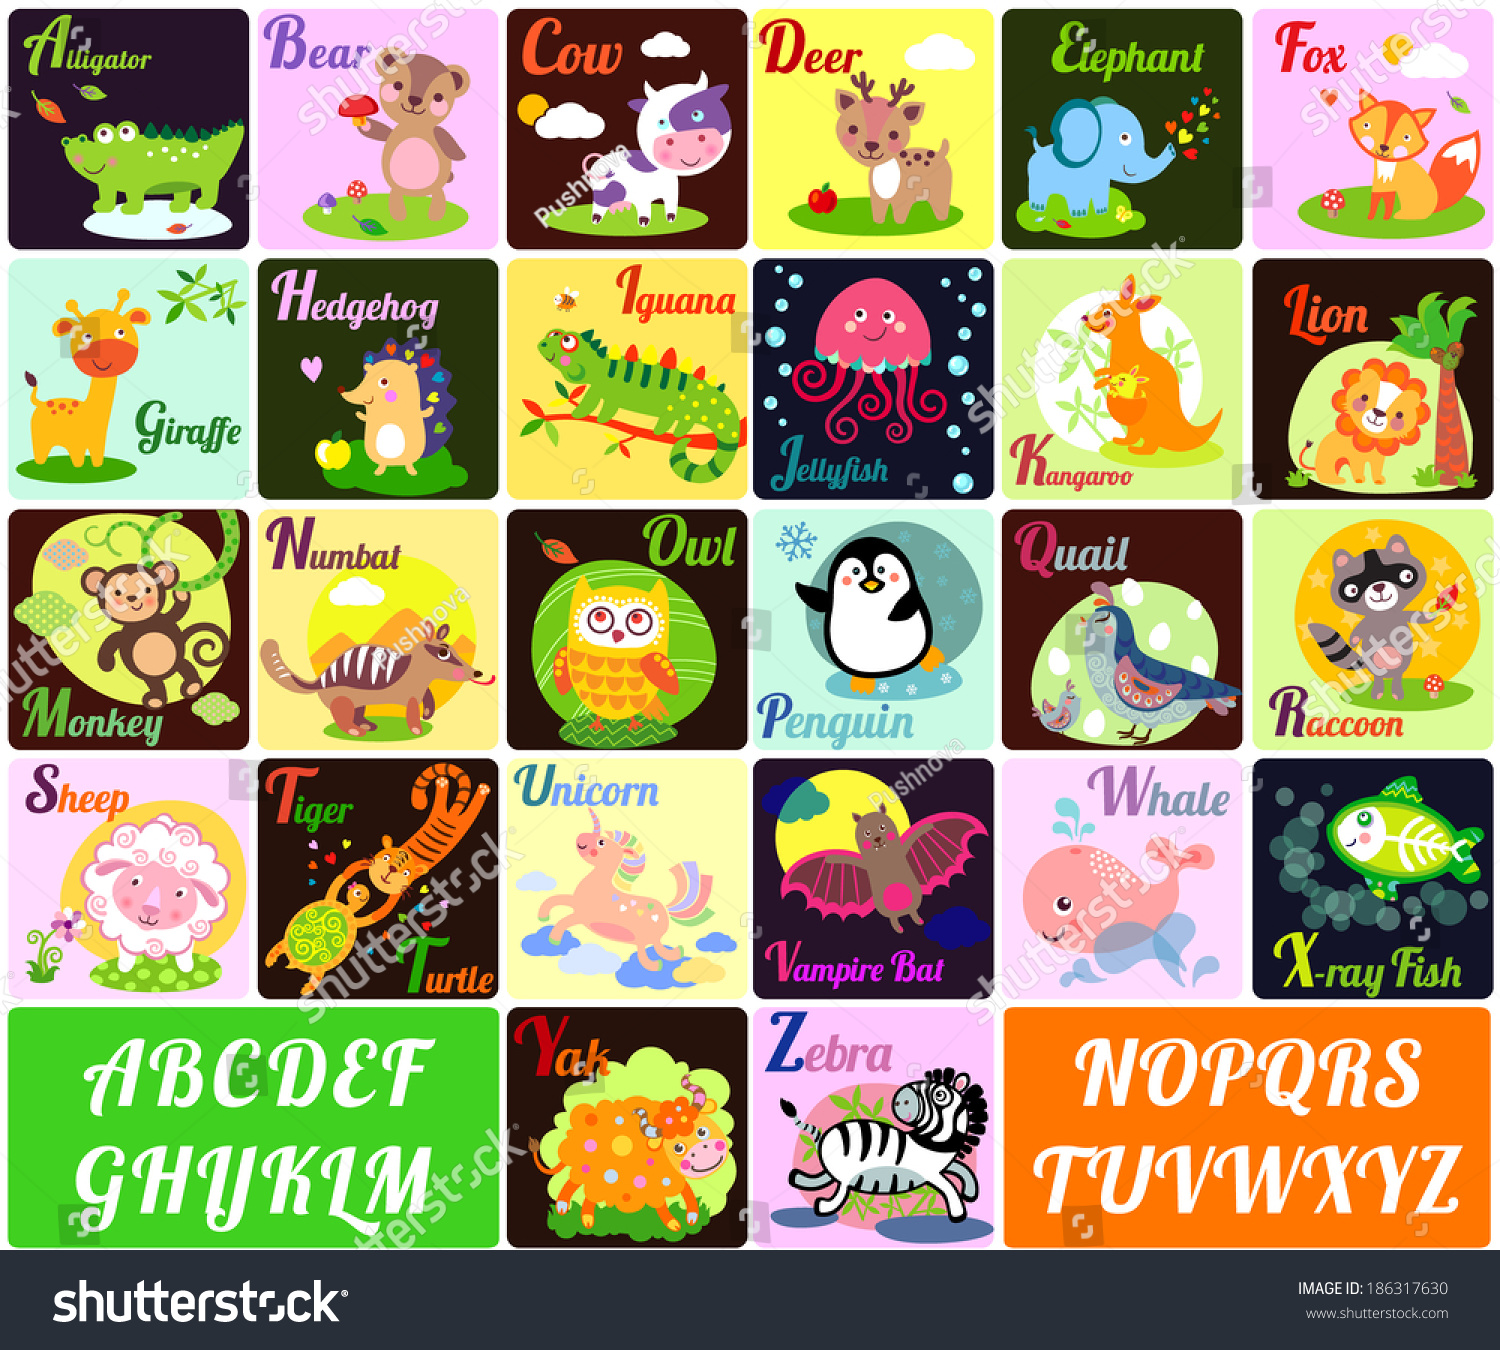 A Vector Illustration Of Alphabet Animals From A To Z - 186317630